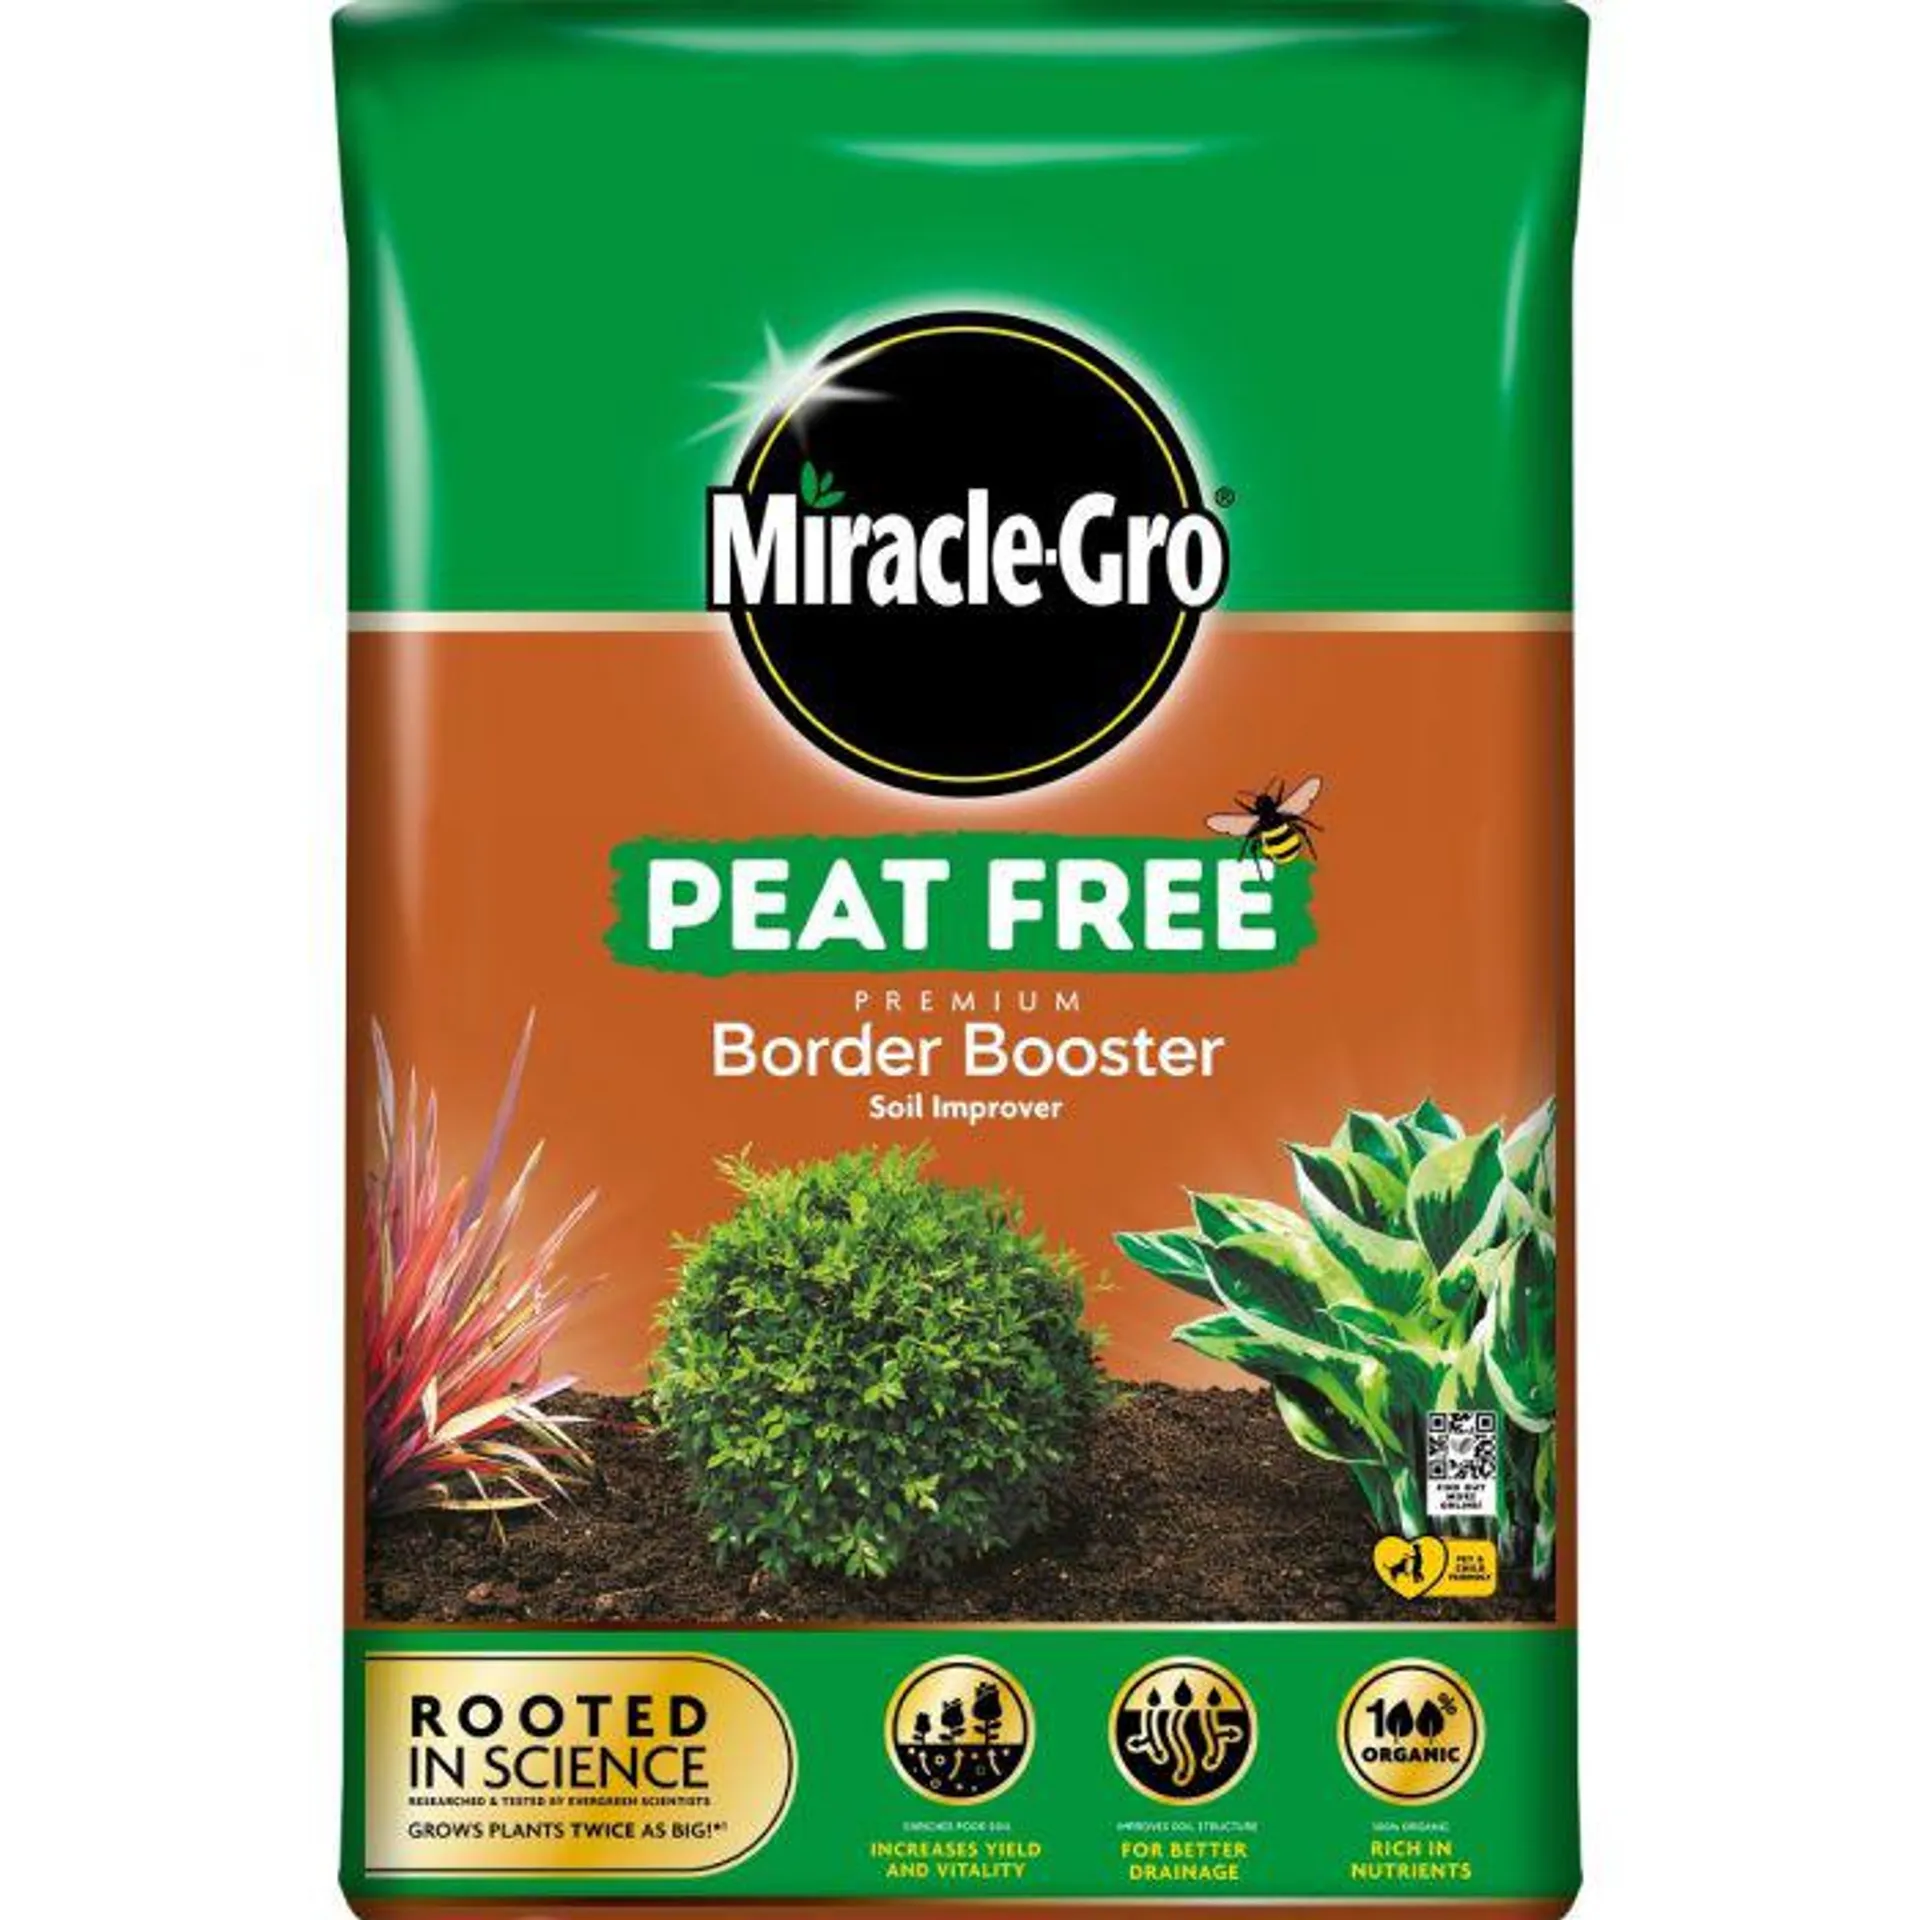 Miracle-Gro® Peat Free Premium Border Booster Soil Improver 40 Litres